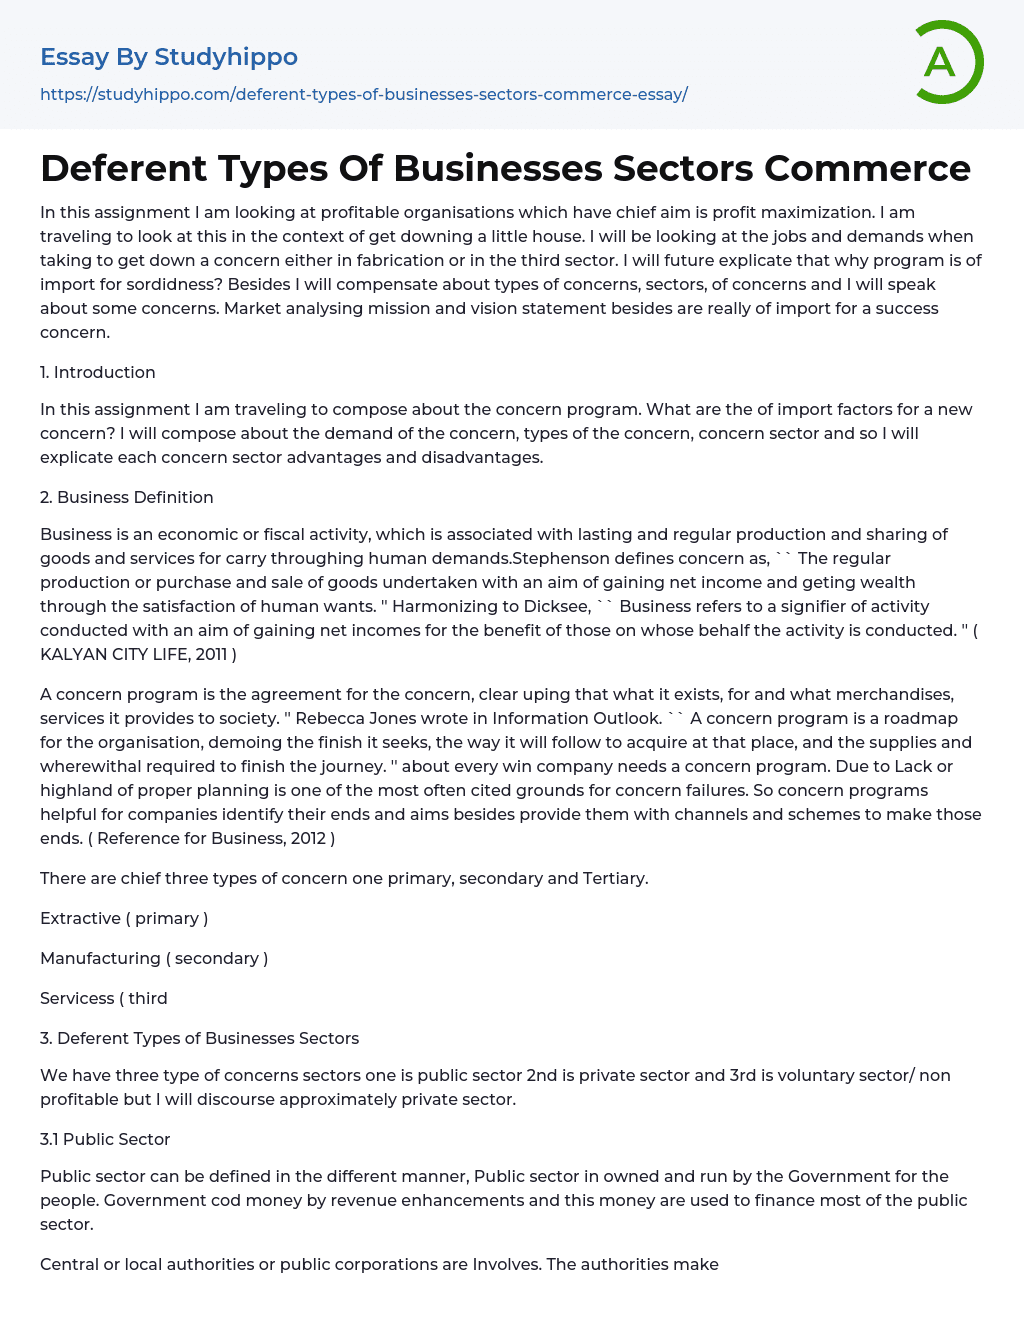 Deferent Types Of Businesses Sectors Commerce Essay Example